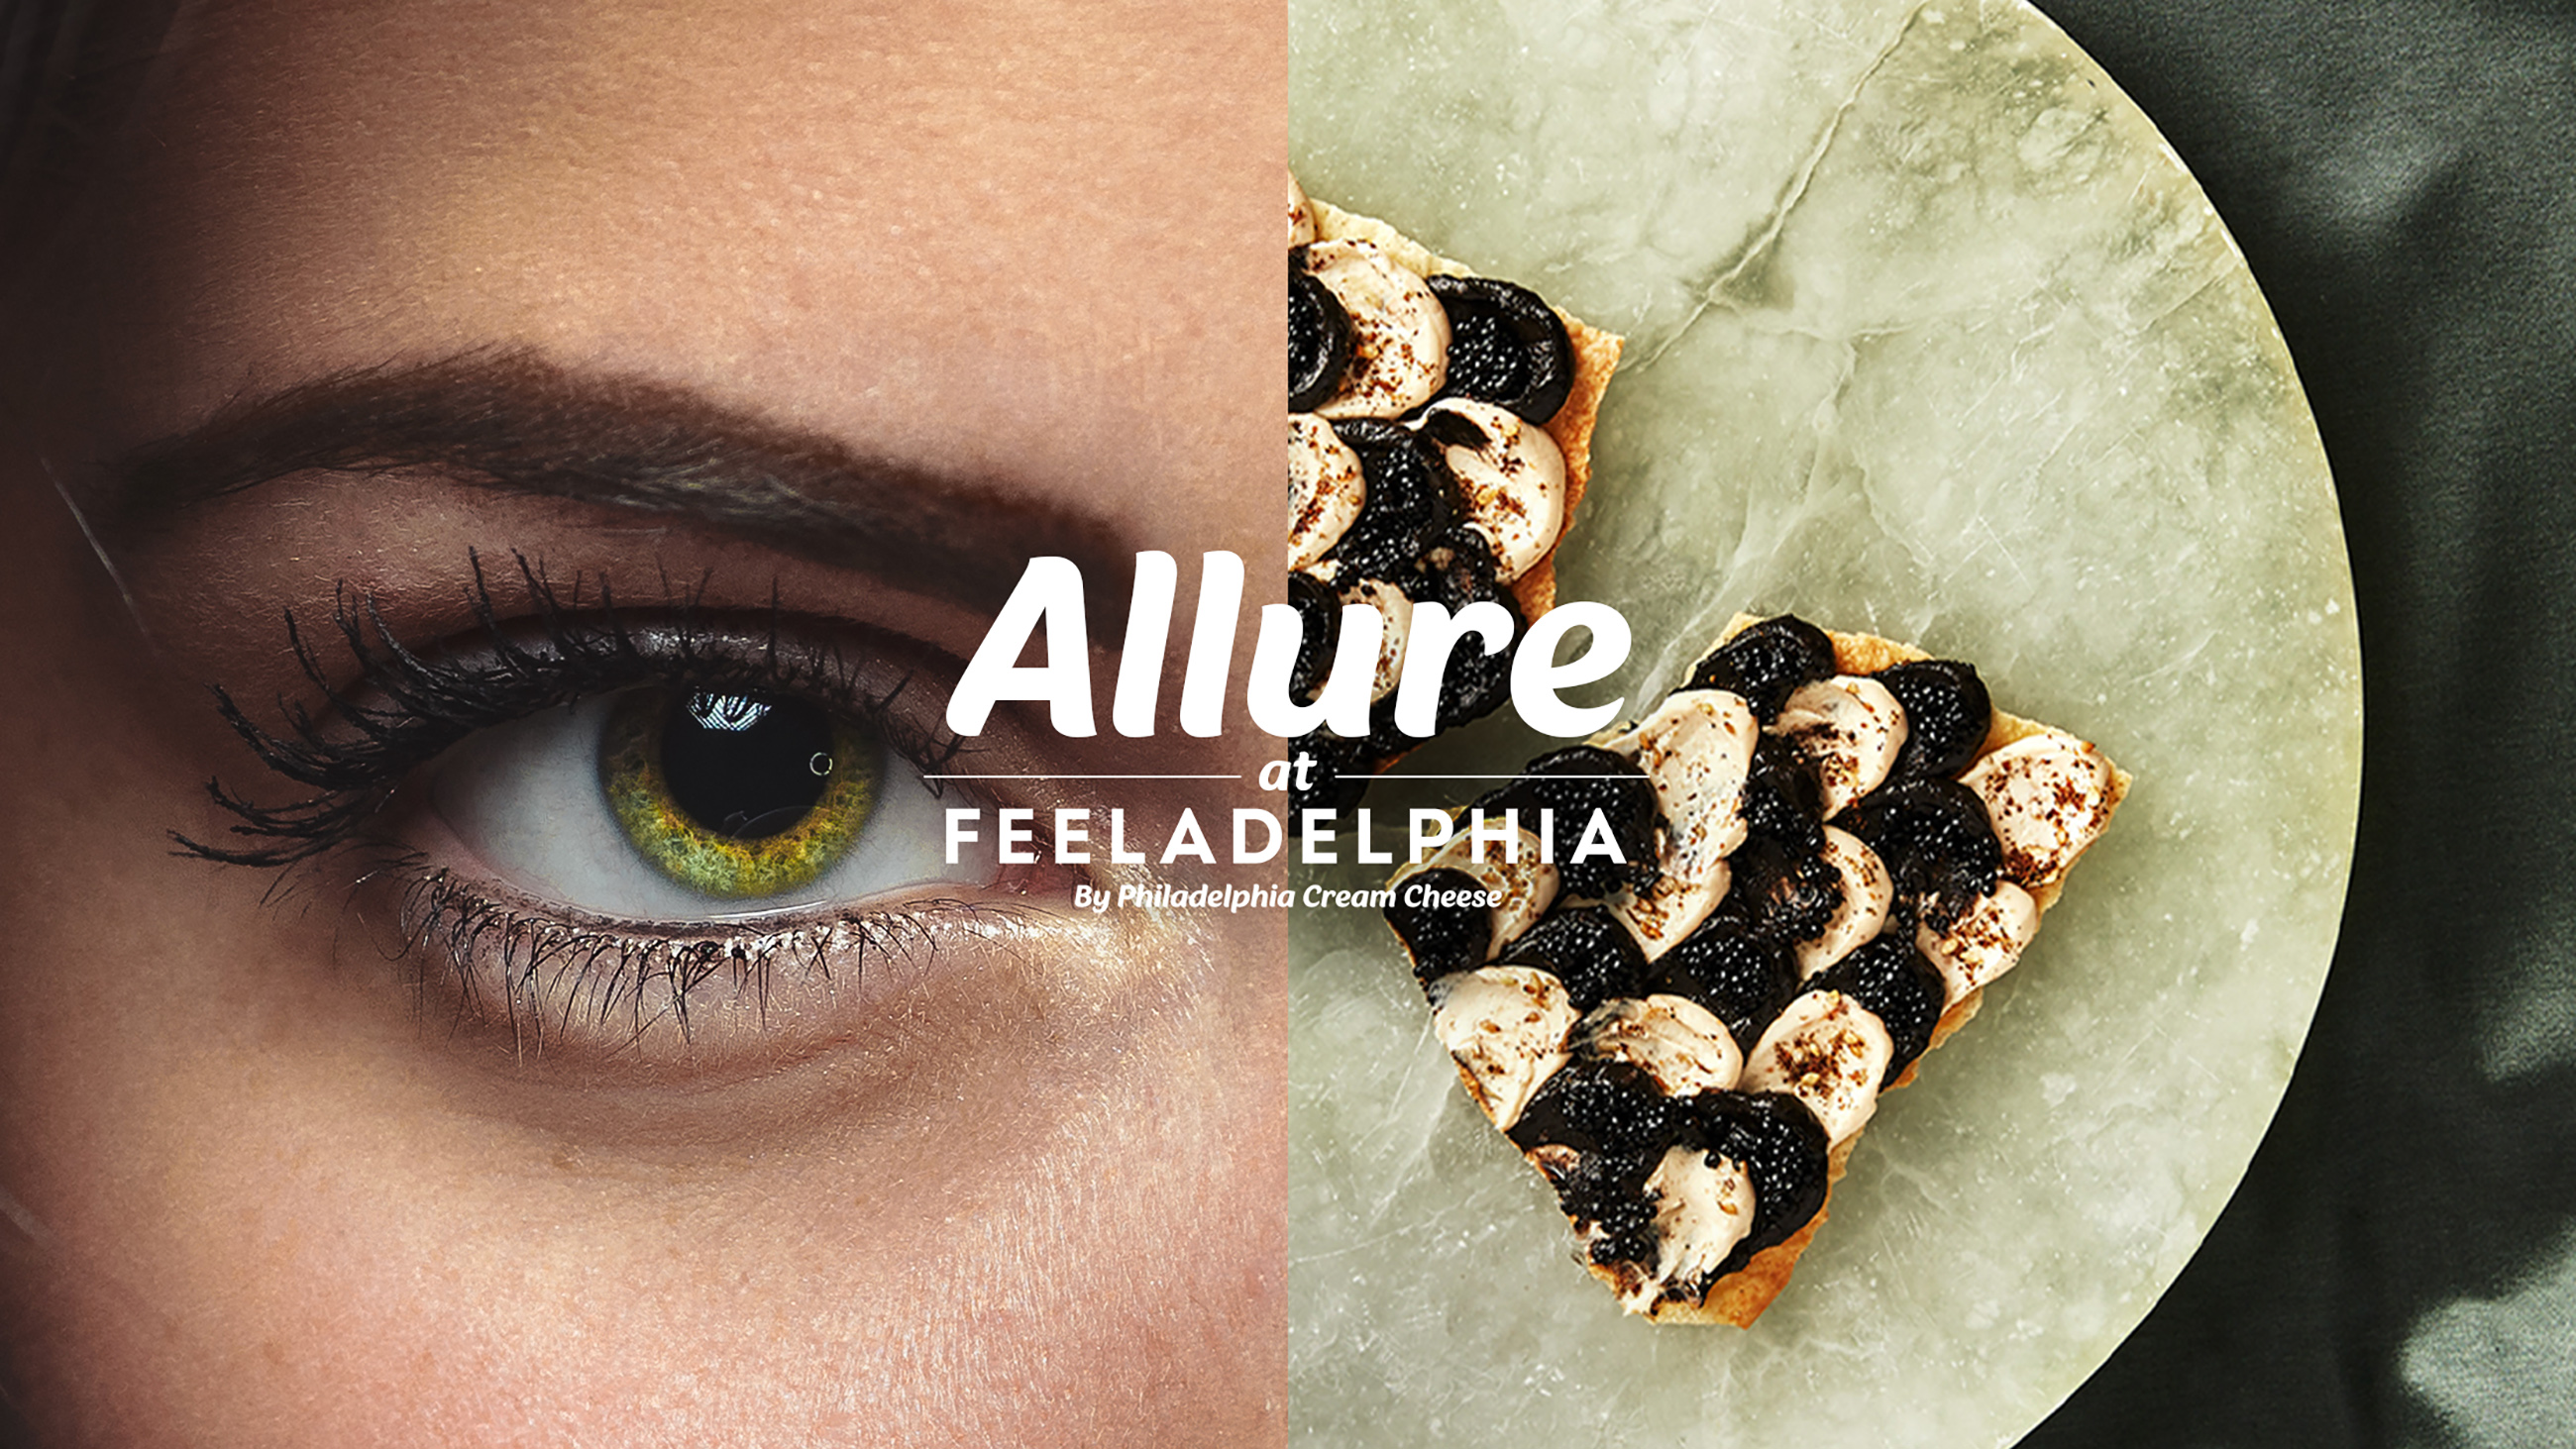 Allure, the opening dish, features a combination of cream cheese-infused spreads and caviar.